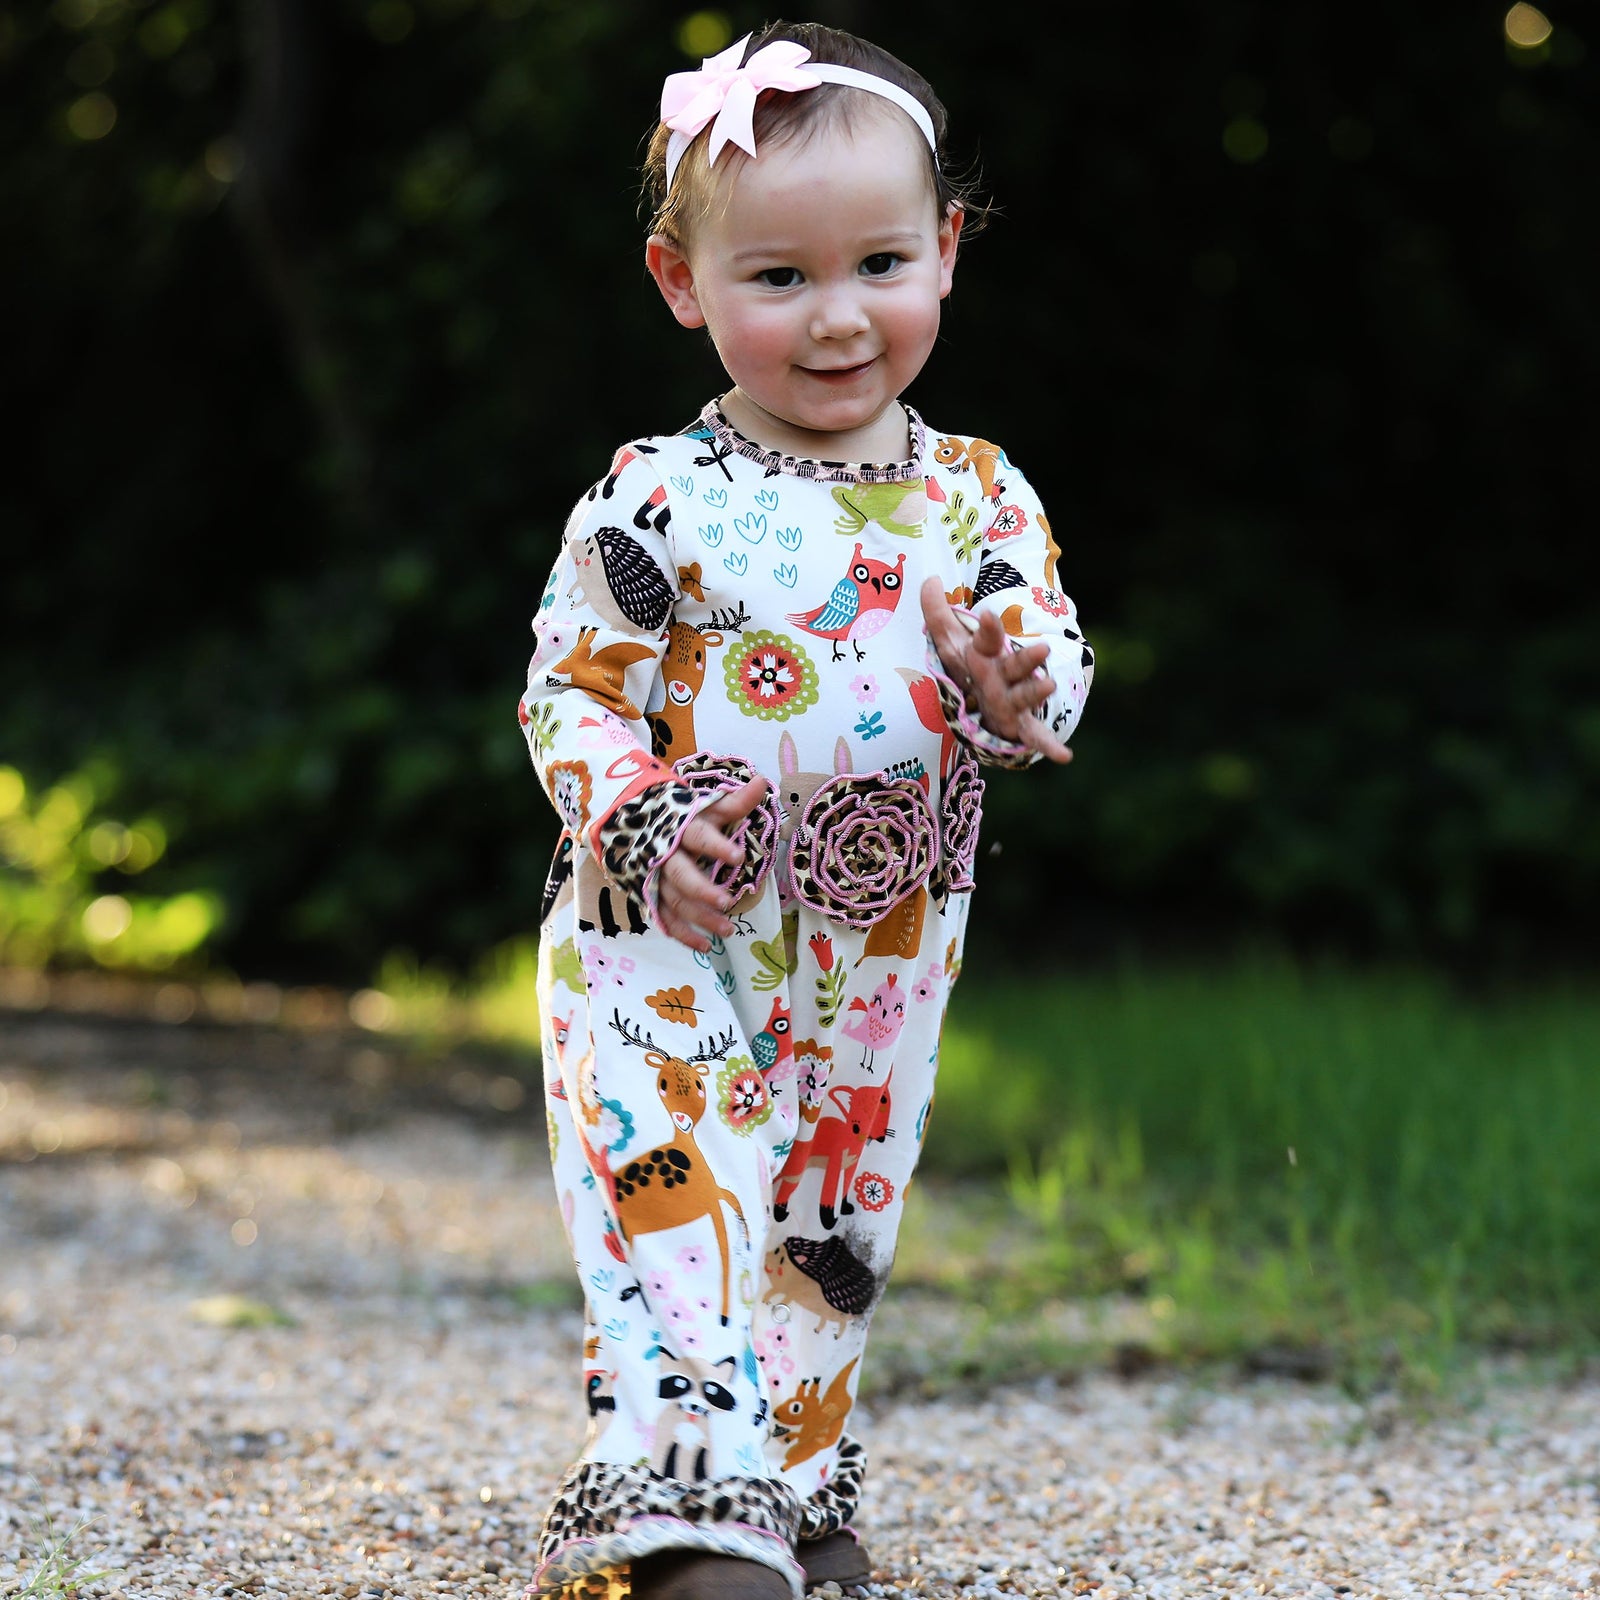 Long Sleeve Forest Animal Friends Baby Toddler Girls Romper Size 6 Mo-24 Mo by AnnLoren